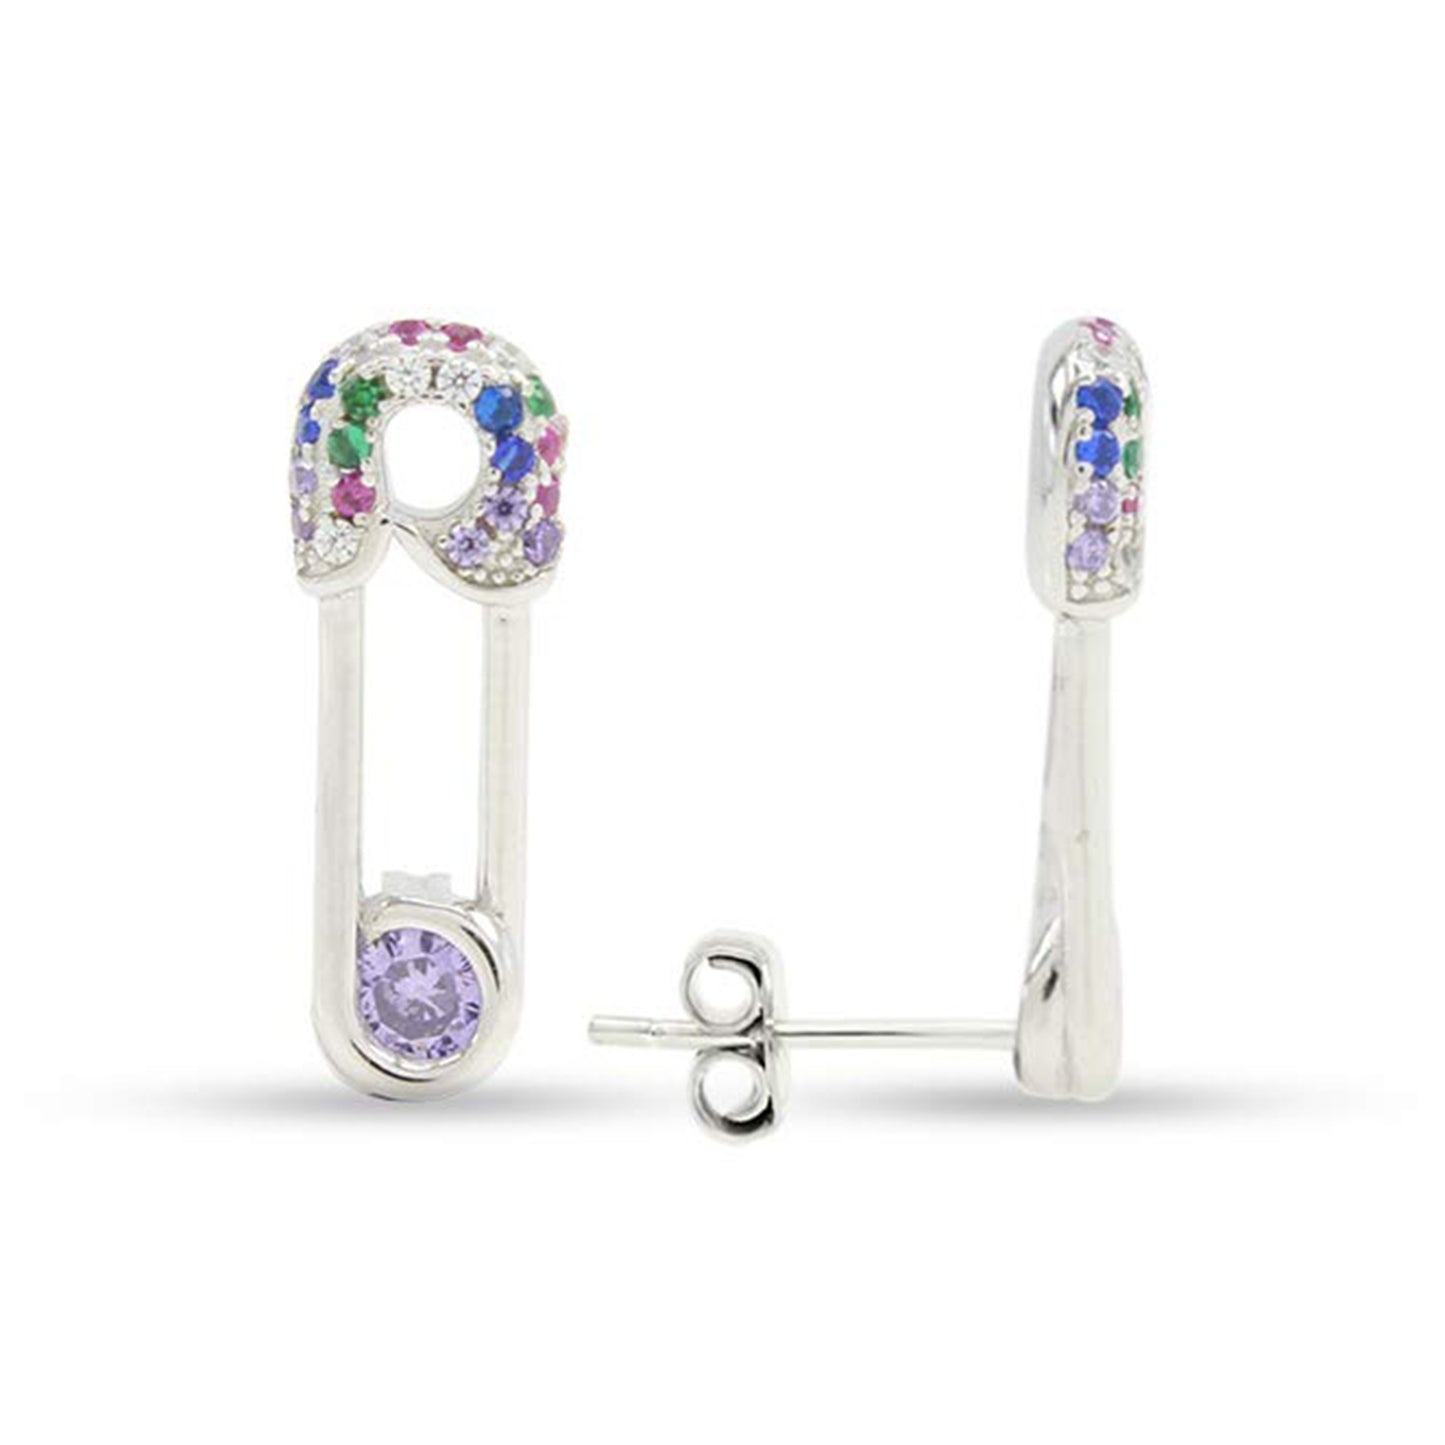 Colourful Rainbow Cubic Zirconia Tiny Dainty Safety Pin Stud Earrings For Women In 14K Gold Plated 925 Sterling Silver